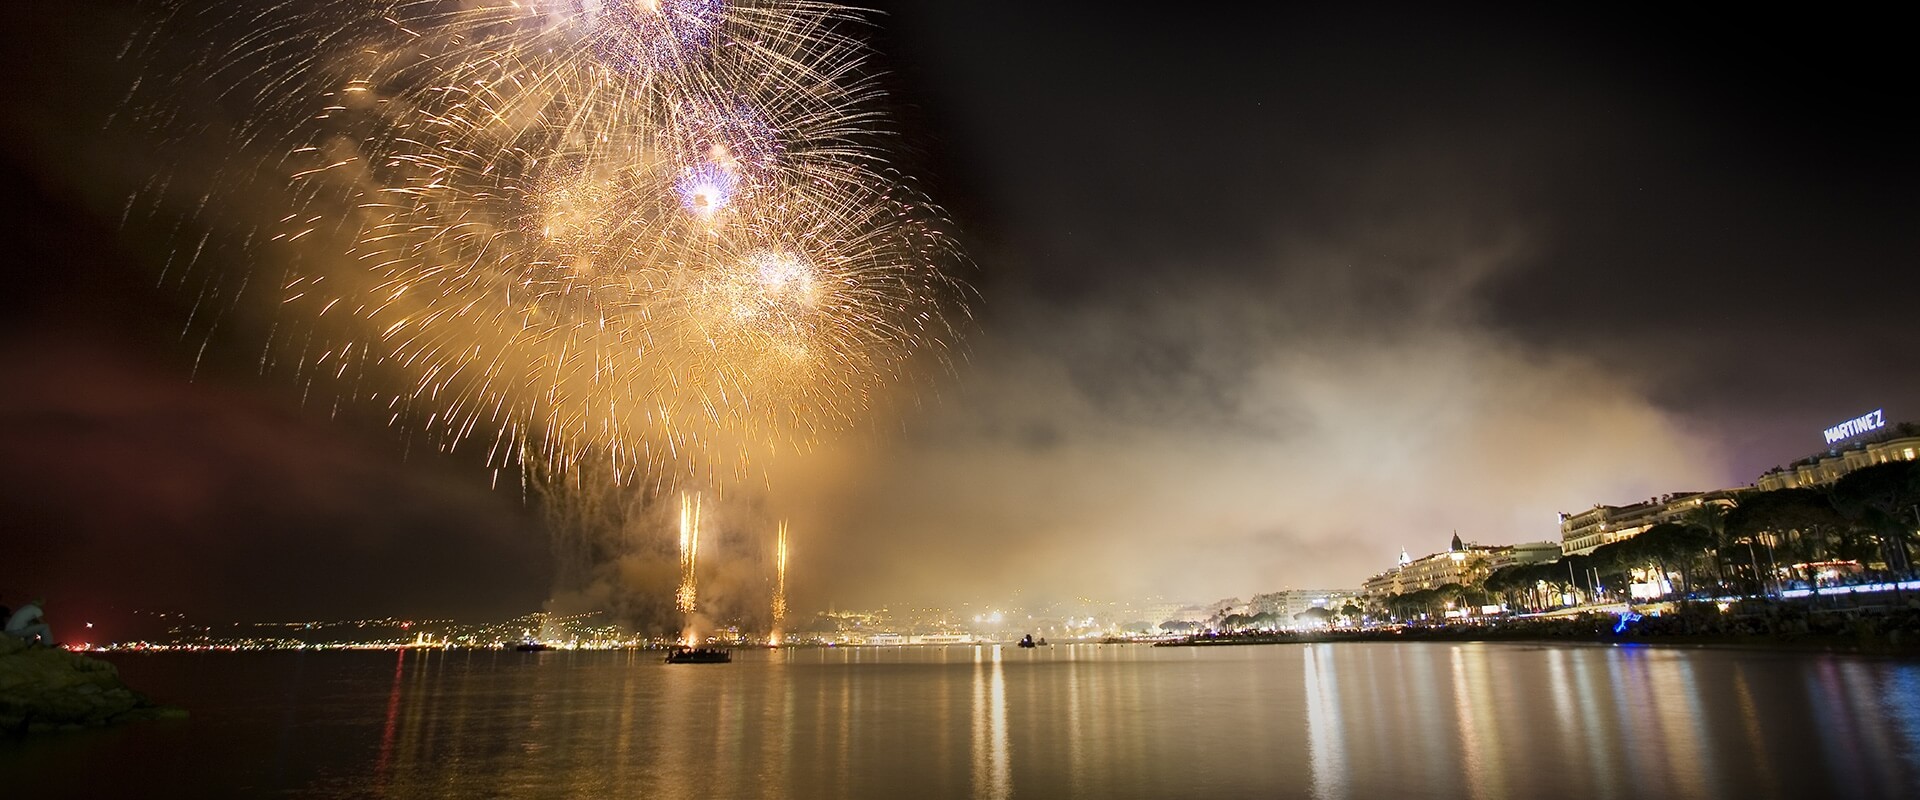 Feu d'artifice French Riviera - 60 tirs, 1'30 minutes – One Artifice